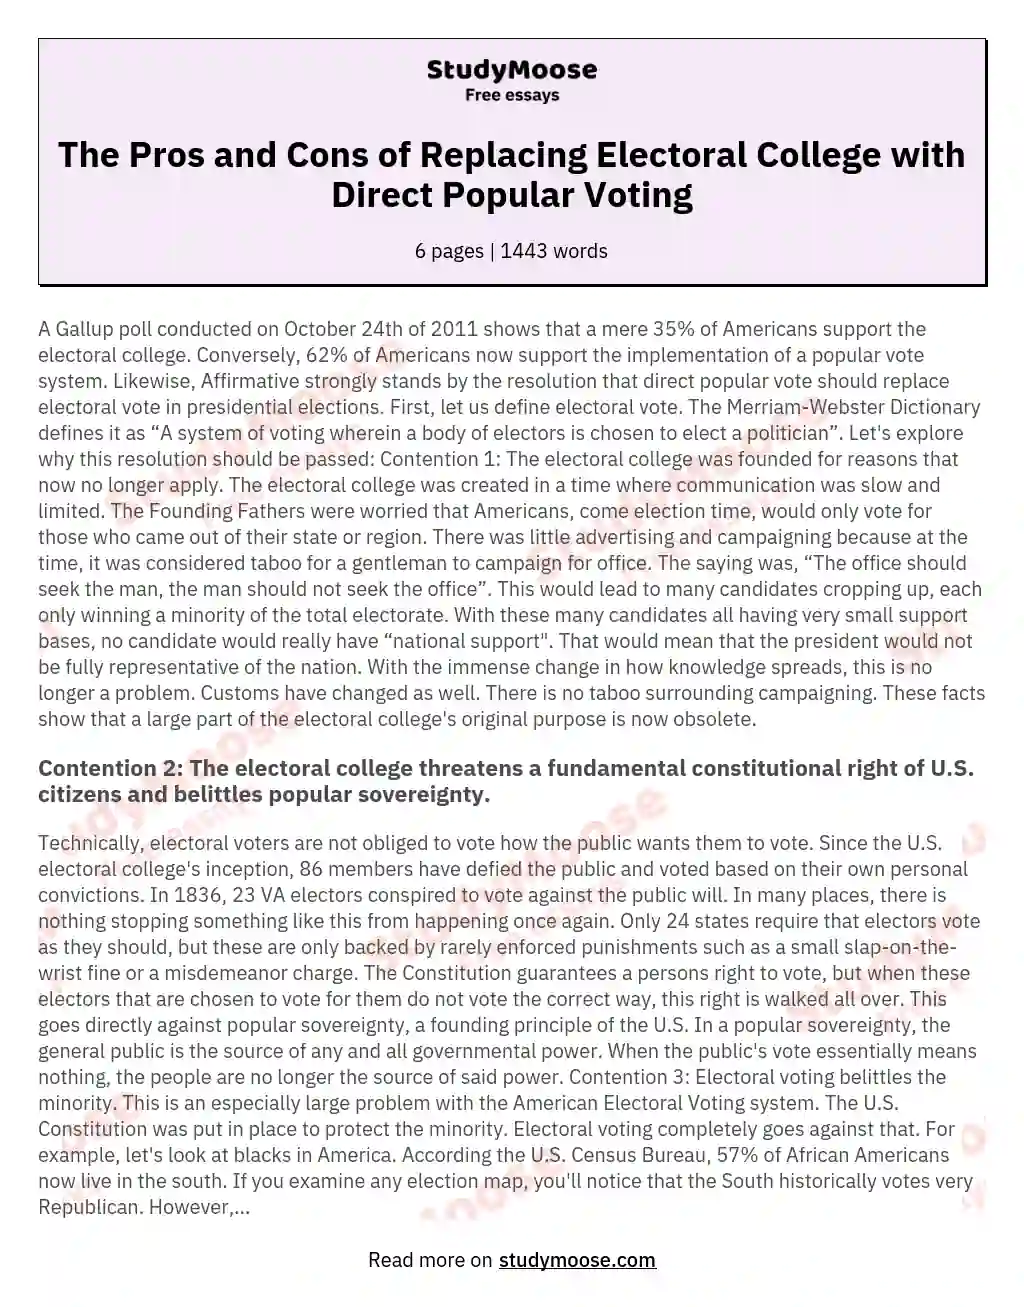 The Pros and Cons of Replacing Electoral College with Direct Popular Voting essay